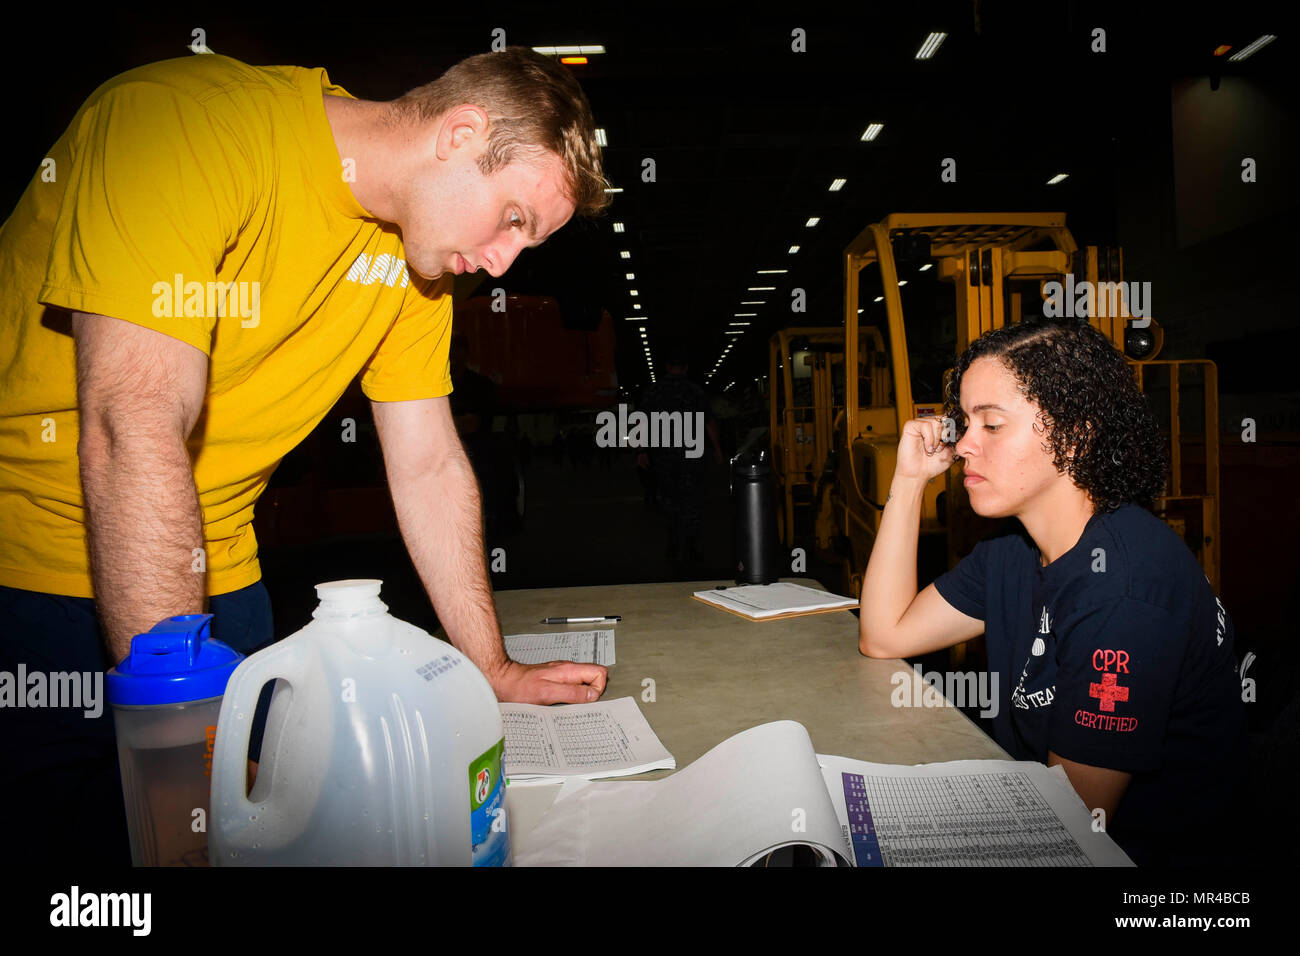 170505-N-LA456-037  NORFOLK, Va. (May 5, 2017) Aviation Ordnanceman 3rd Class Whitney Trella, right, from Spartanburg, S.C., shows physical readiness test (PRT) standards to Interior Communications Electrician Seaman Derek Walshe, from Syracuse, N.Y., in the hangar bay of the aircraft carrier USS Dwight D. Eisenhower (CVN 69) (Ike). Ike is currently pier side during the sustainment phase of the Optimized Fleet Response Plan (OFRP). (U.S. Navy photo by Mass Communication Specialist Seaman K. A. DaCosta) Stock Photo